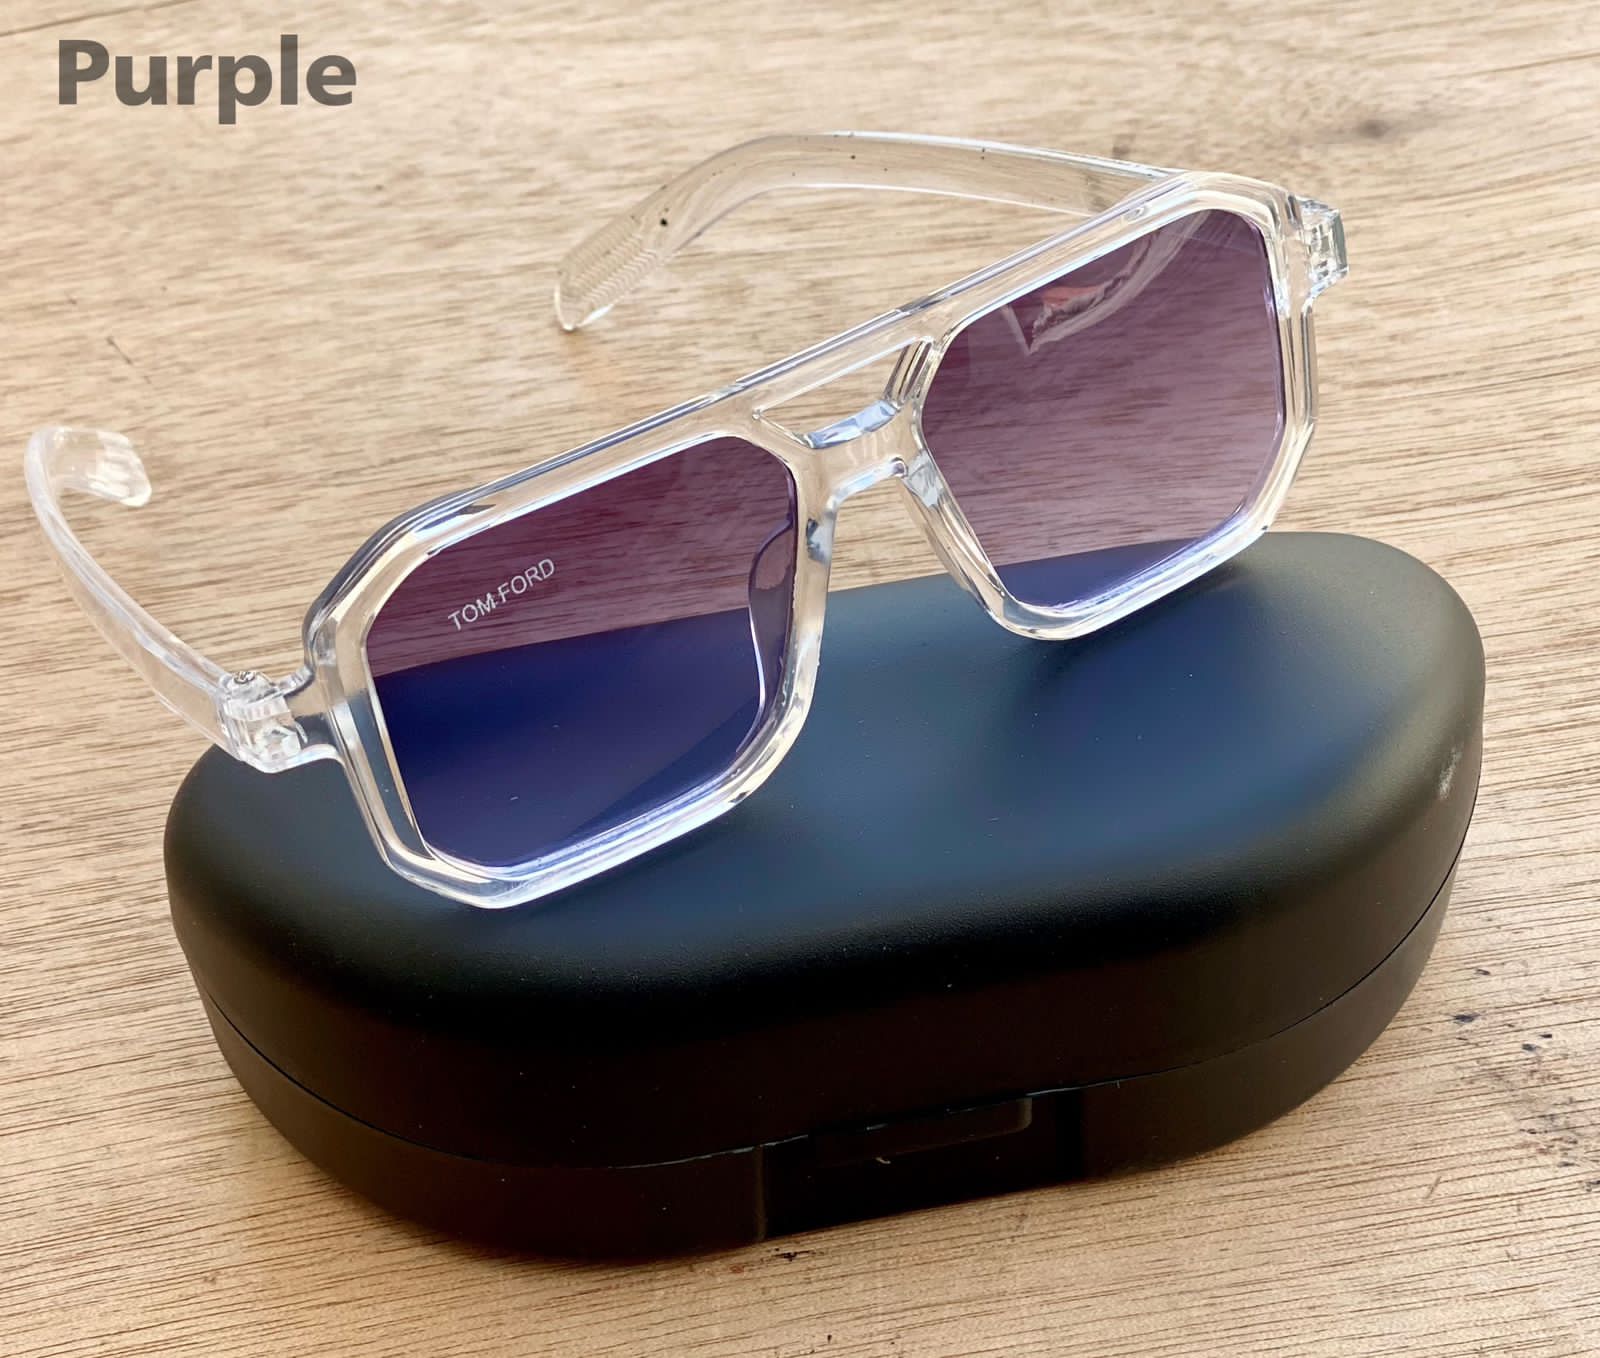 Details View - TRANSPARENT FRAME WITH FIBRE GLASS photos - reseller,reseller marketplace,advetising your products,reseller bazzar,resellerbazzar.in,india's classified site,sunglasses in ahmedabad | eyewear in vadodara |  eyewear in ahmedabad